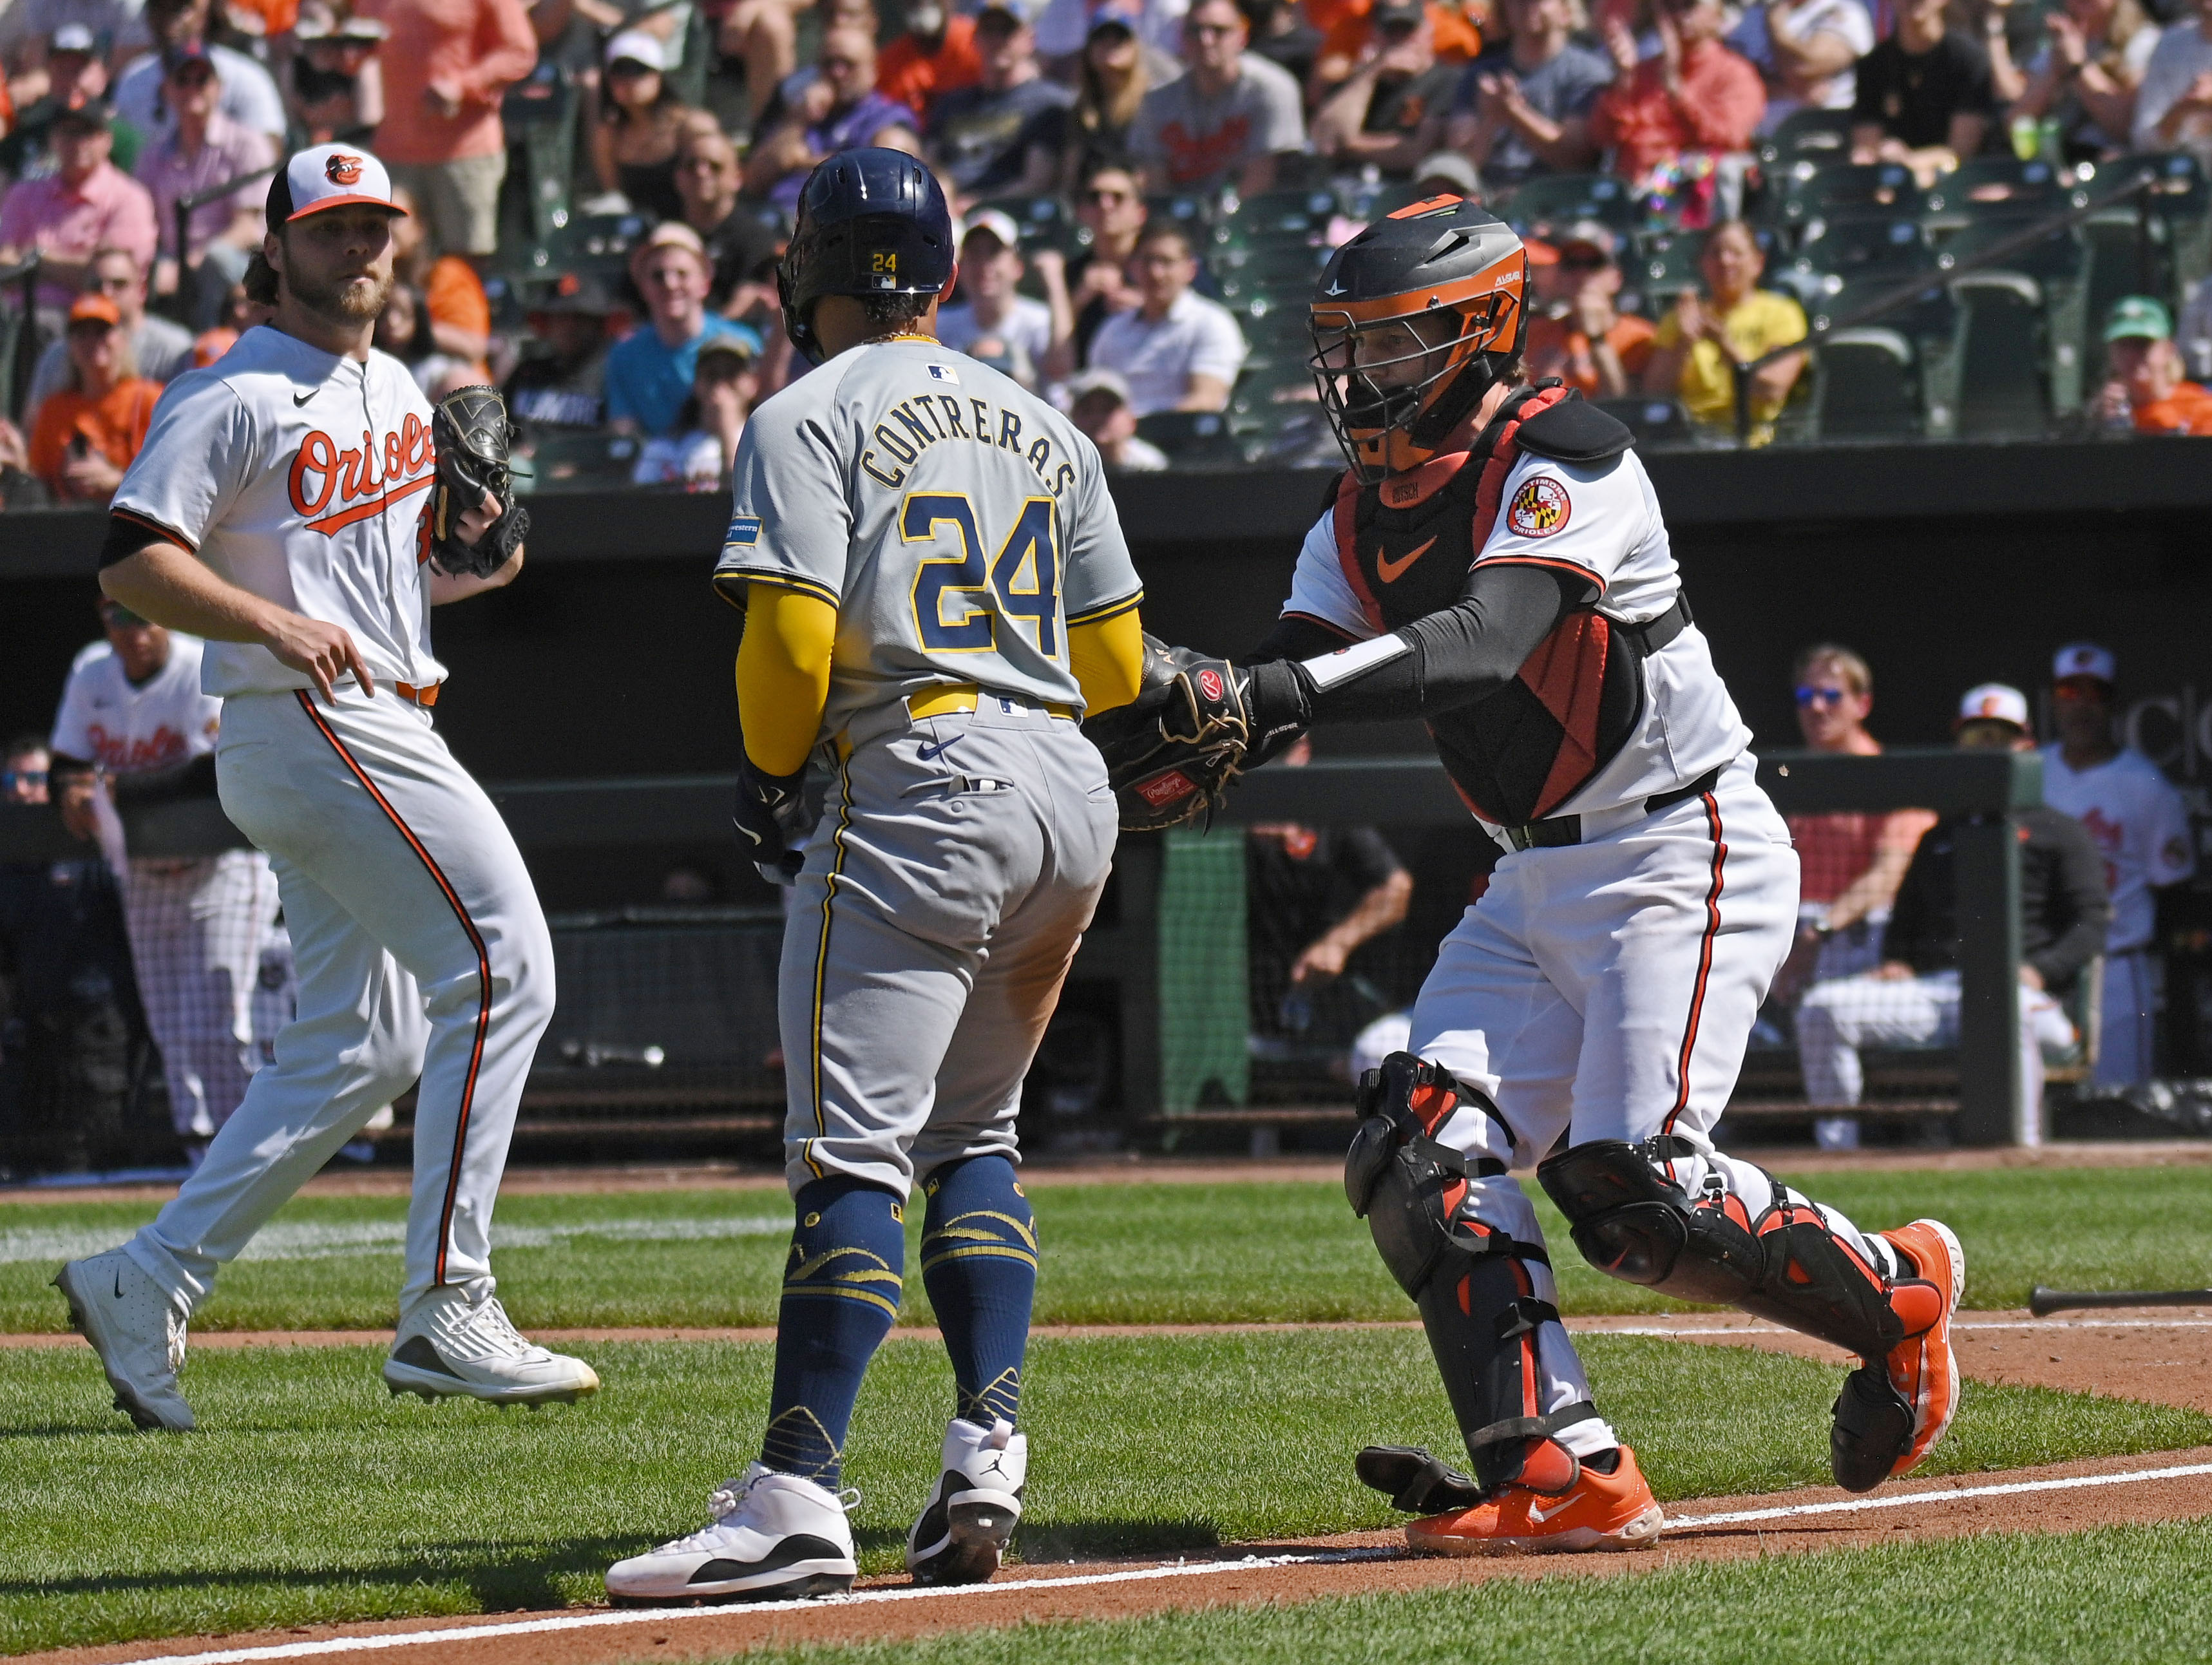 Orioles catcher Adley Rutschman, right, tags out Brewers William Contreras in a run down in the fifth inning. The Orioles defeated the Brewers 6-4 at Oriole Park at Camden Yards. (Kenneth K. Lam/Staff)